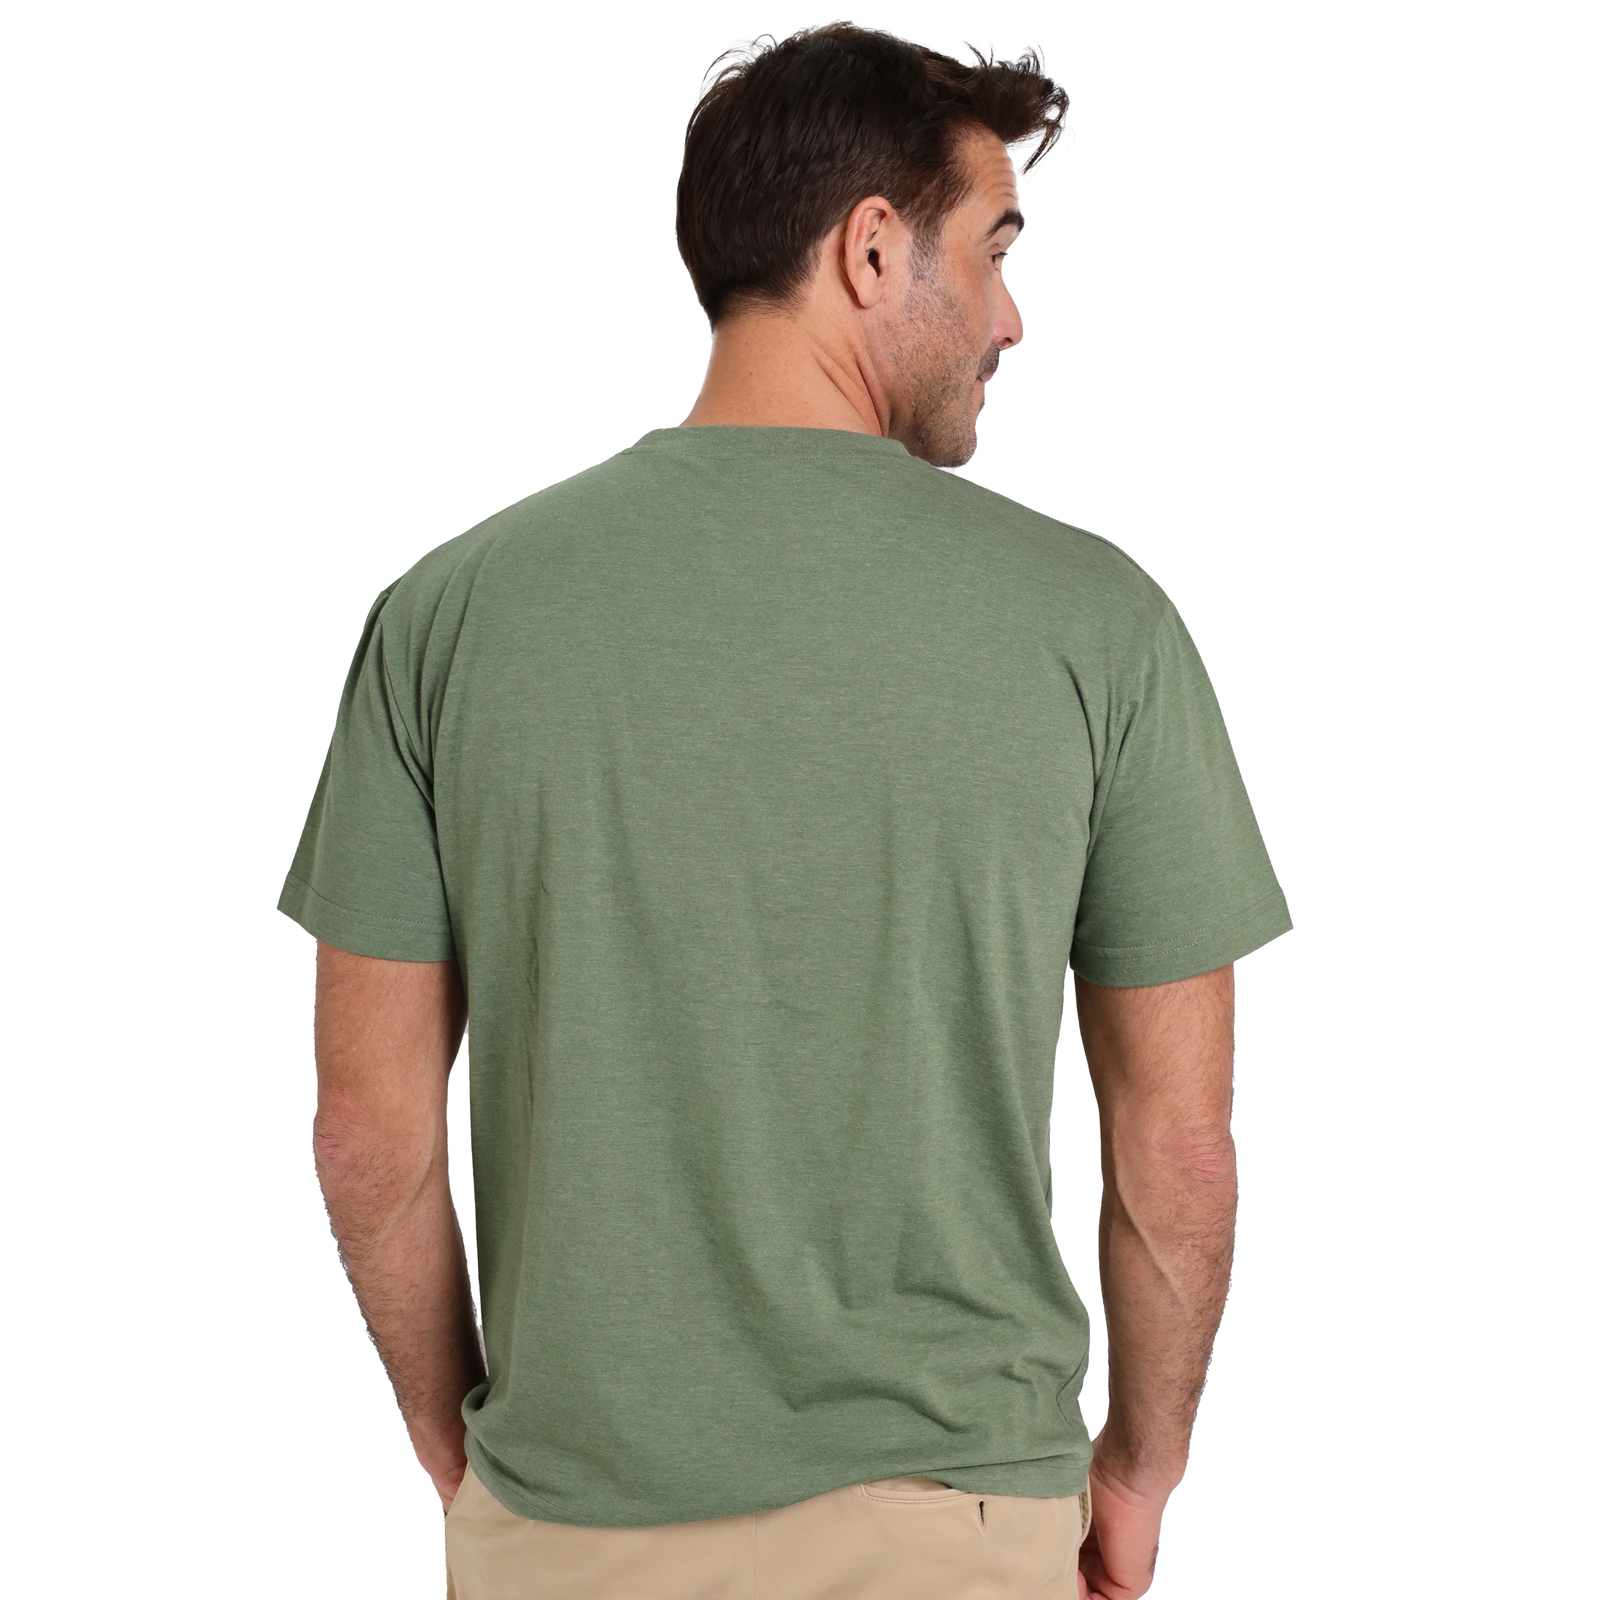 The back view of a man wearing a green Guinness Distressed Irish Label Tee, highlighting an essential product description for SEO optimization.